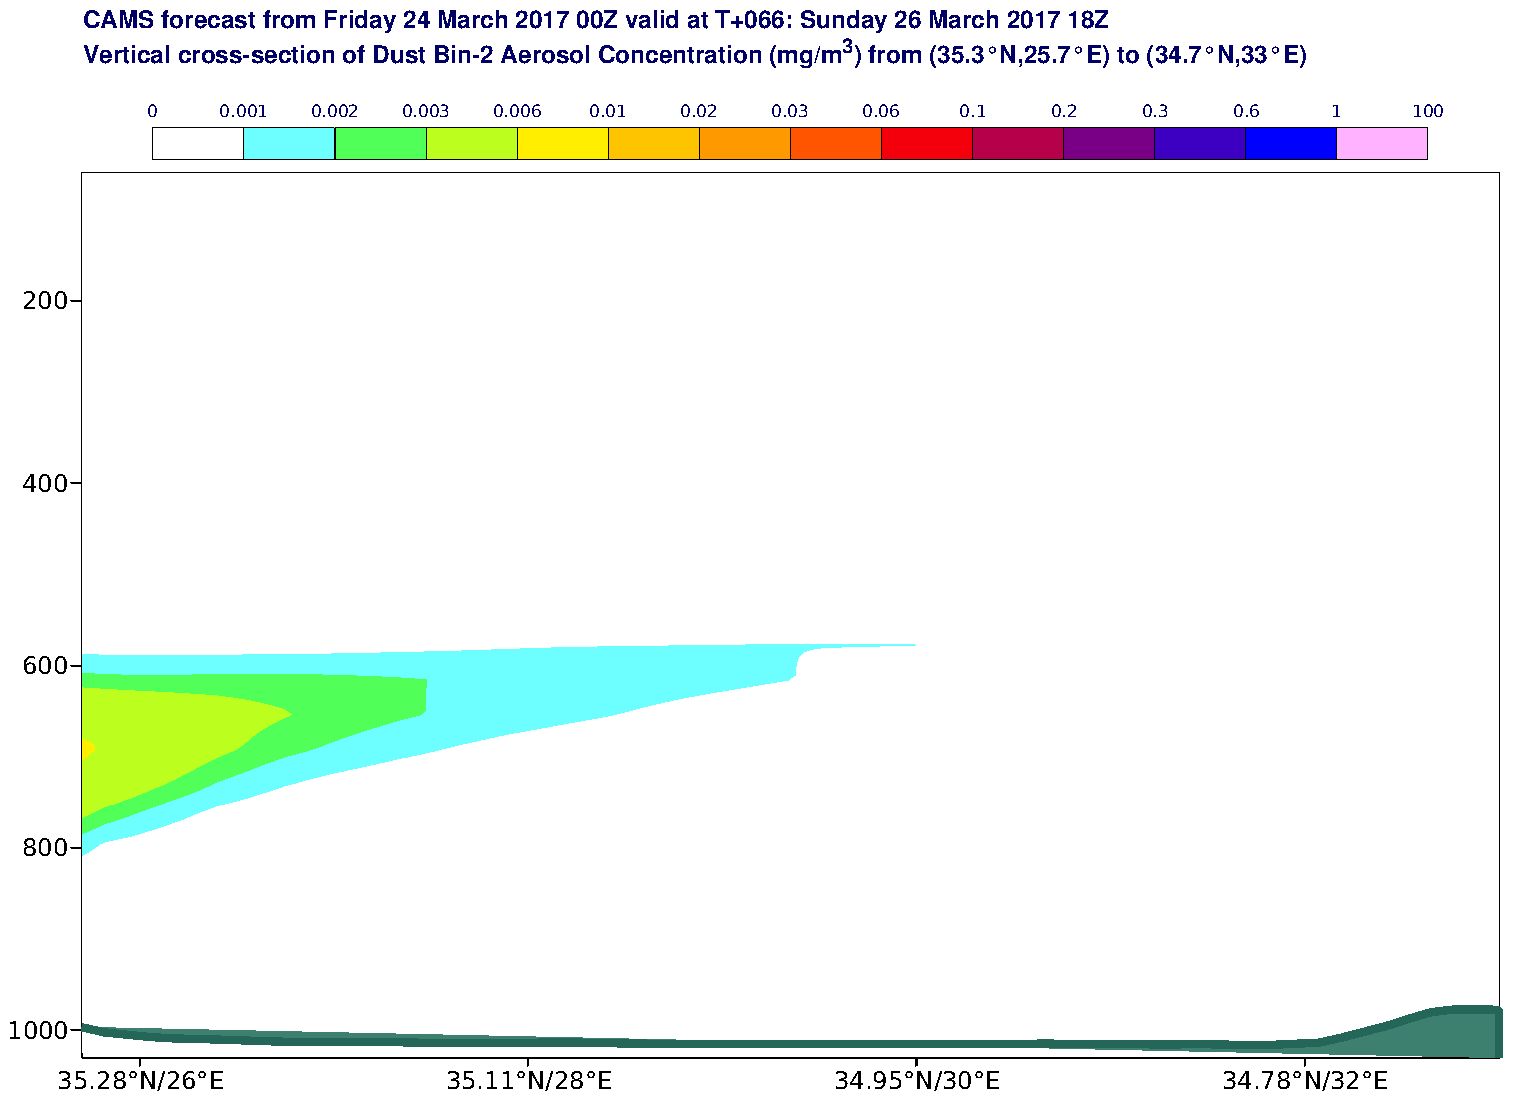 Vertical cross-section of Dust Bin-2 Aerosol Concentration (mg/m3) valid at T66 - 2017-03-26 18:00